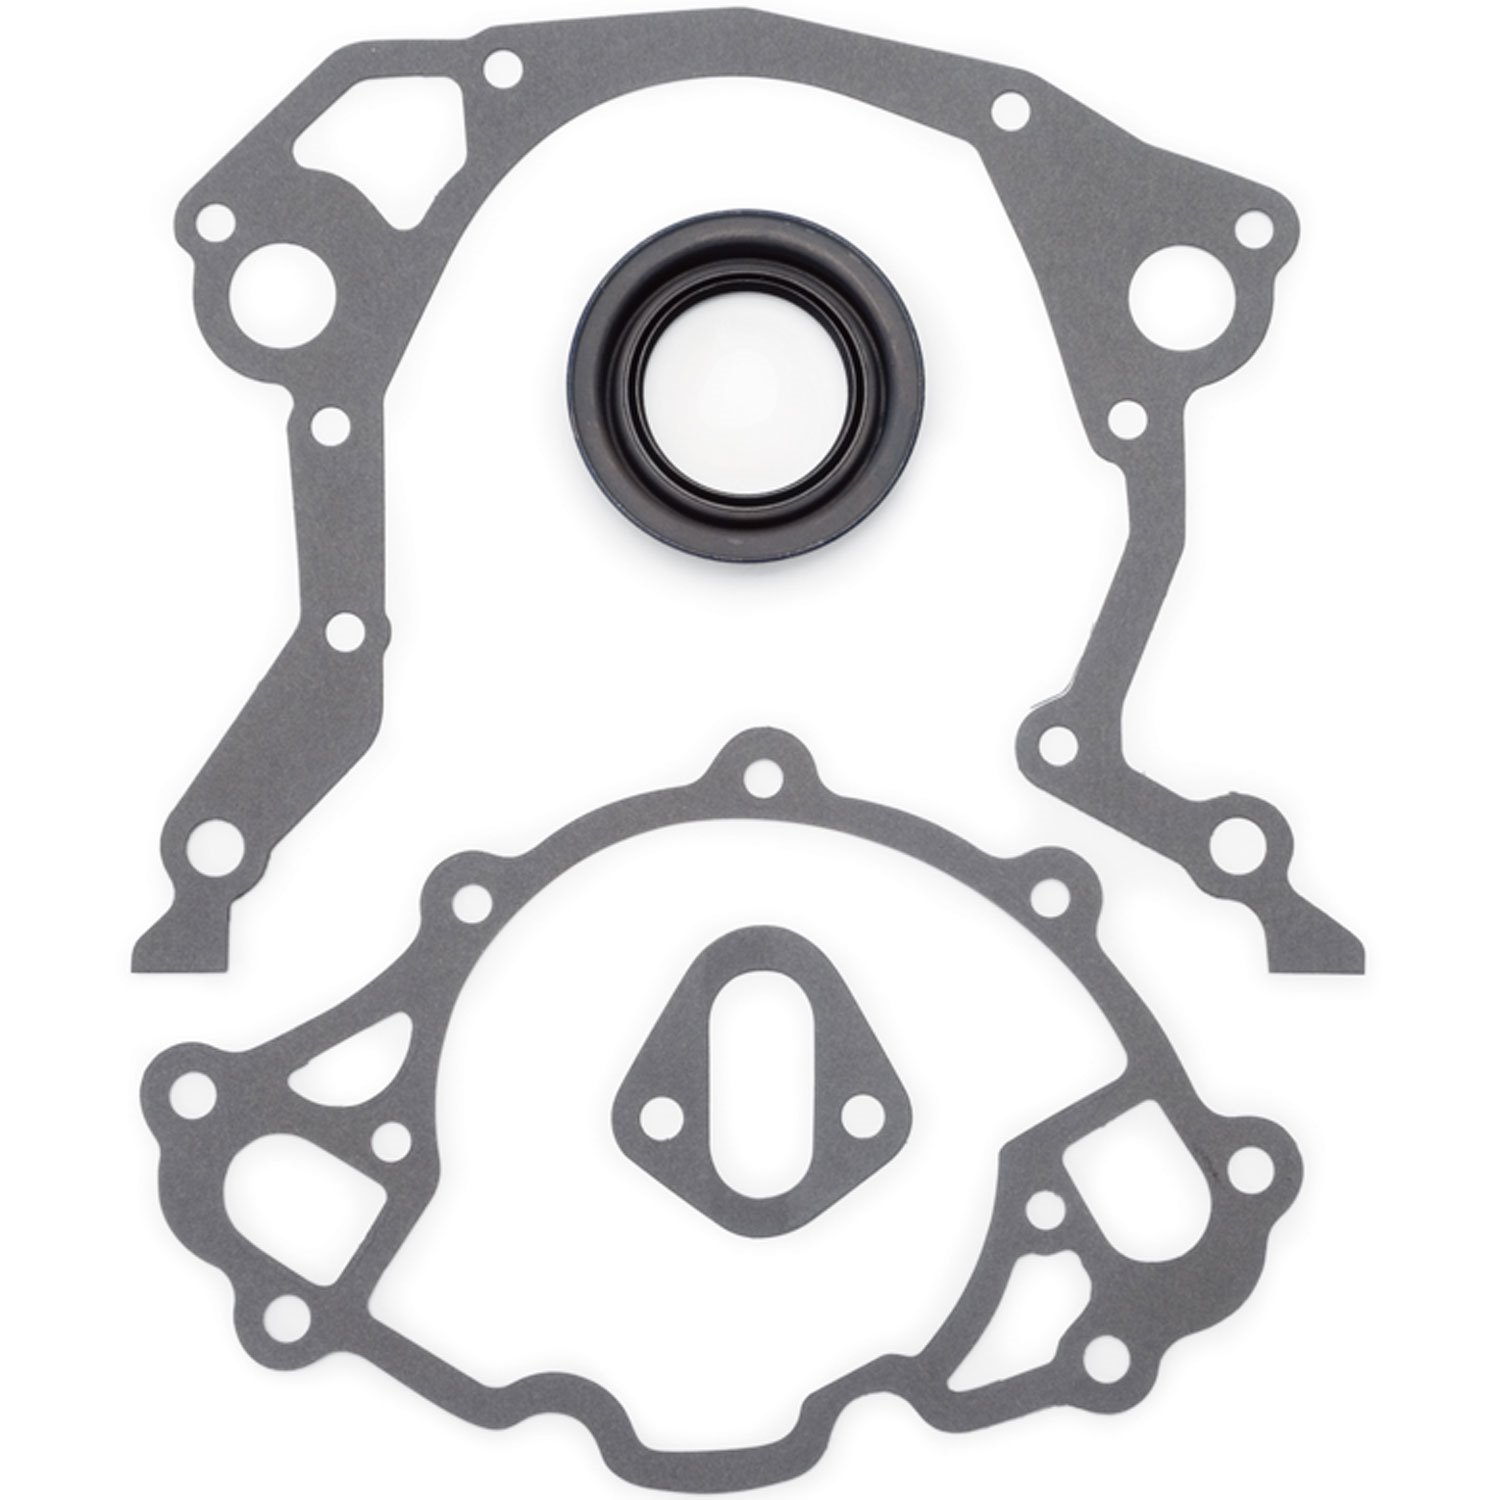 Timing Cover Gasket and Seal for Small Block Ford